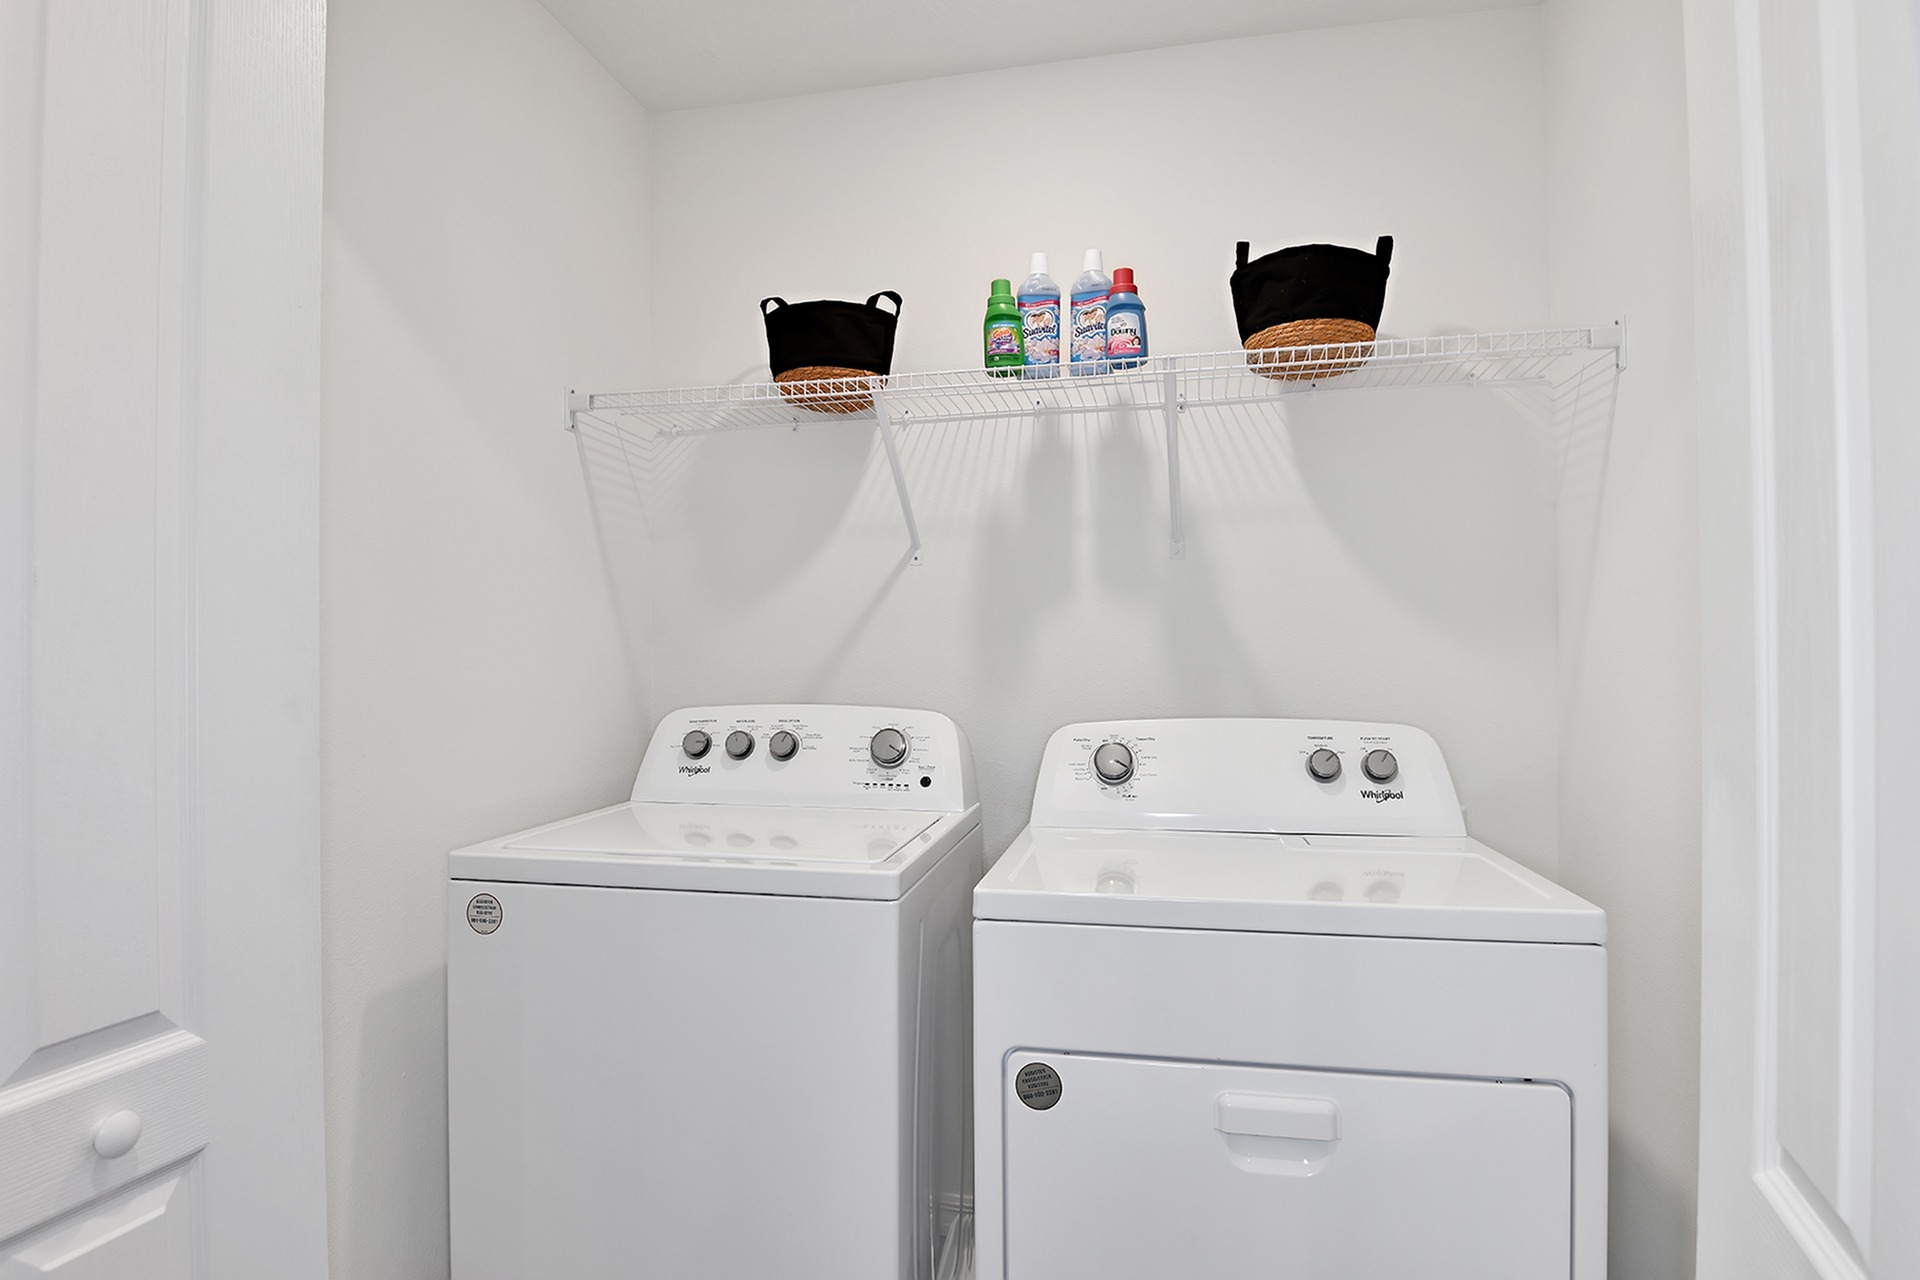 Full-size washer and dryer at a home for rent in Apopka, Florida.